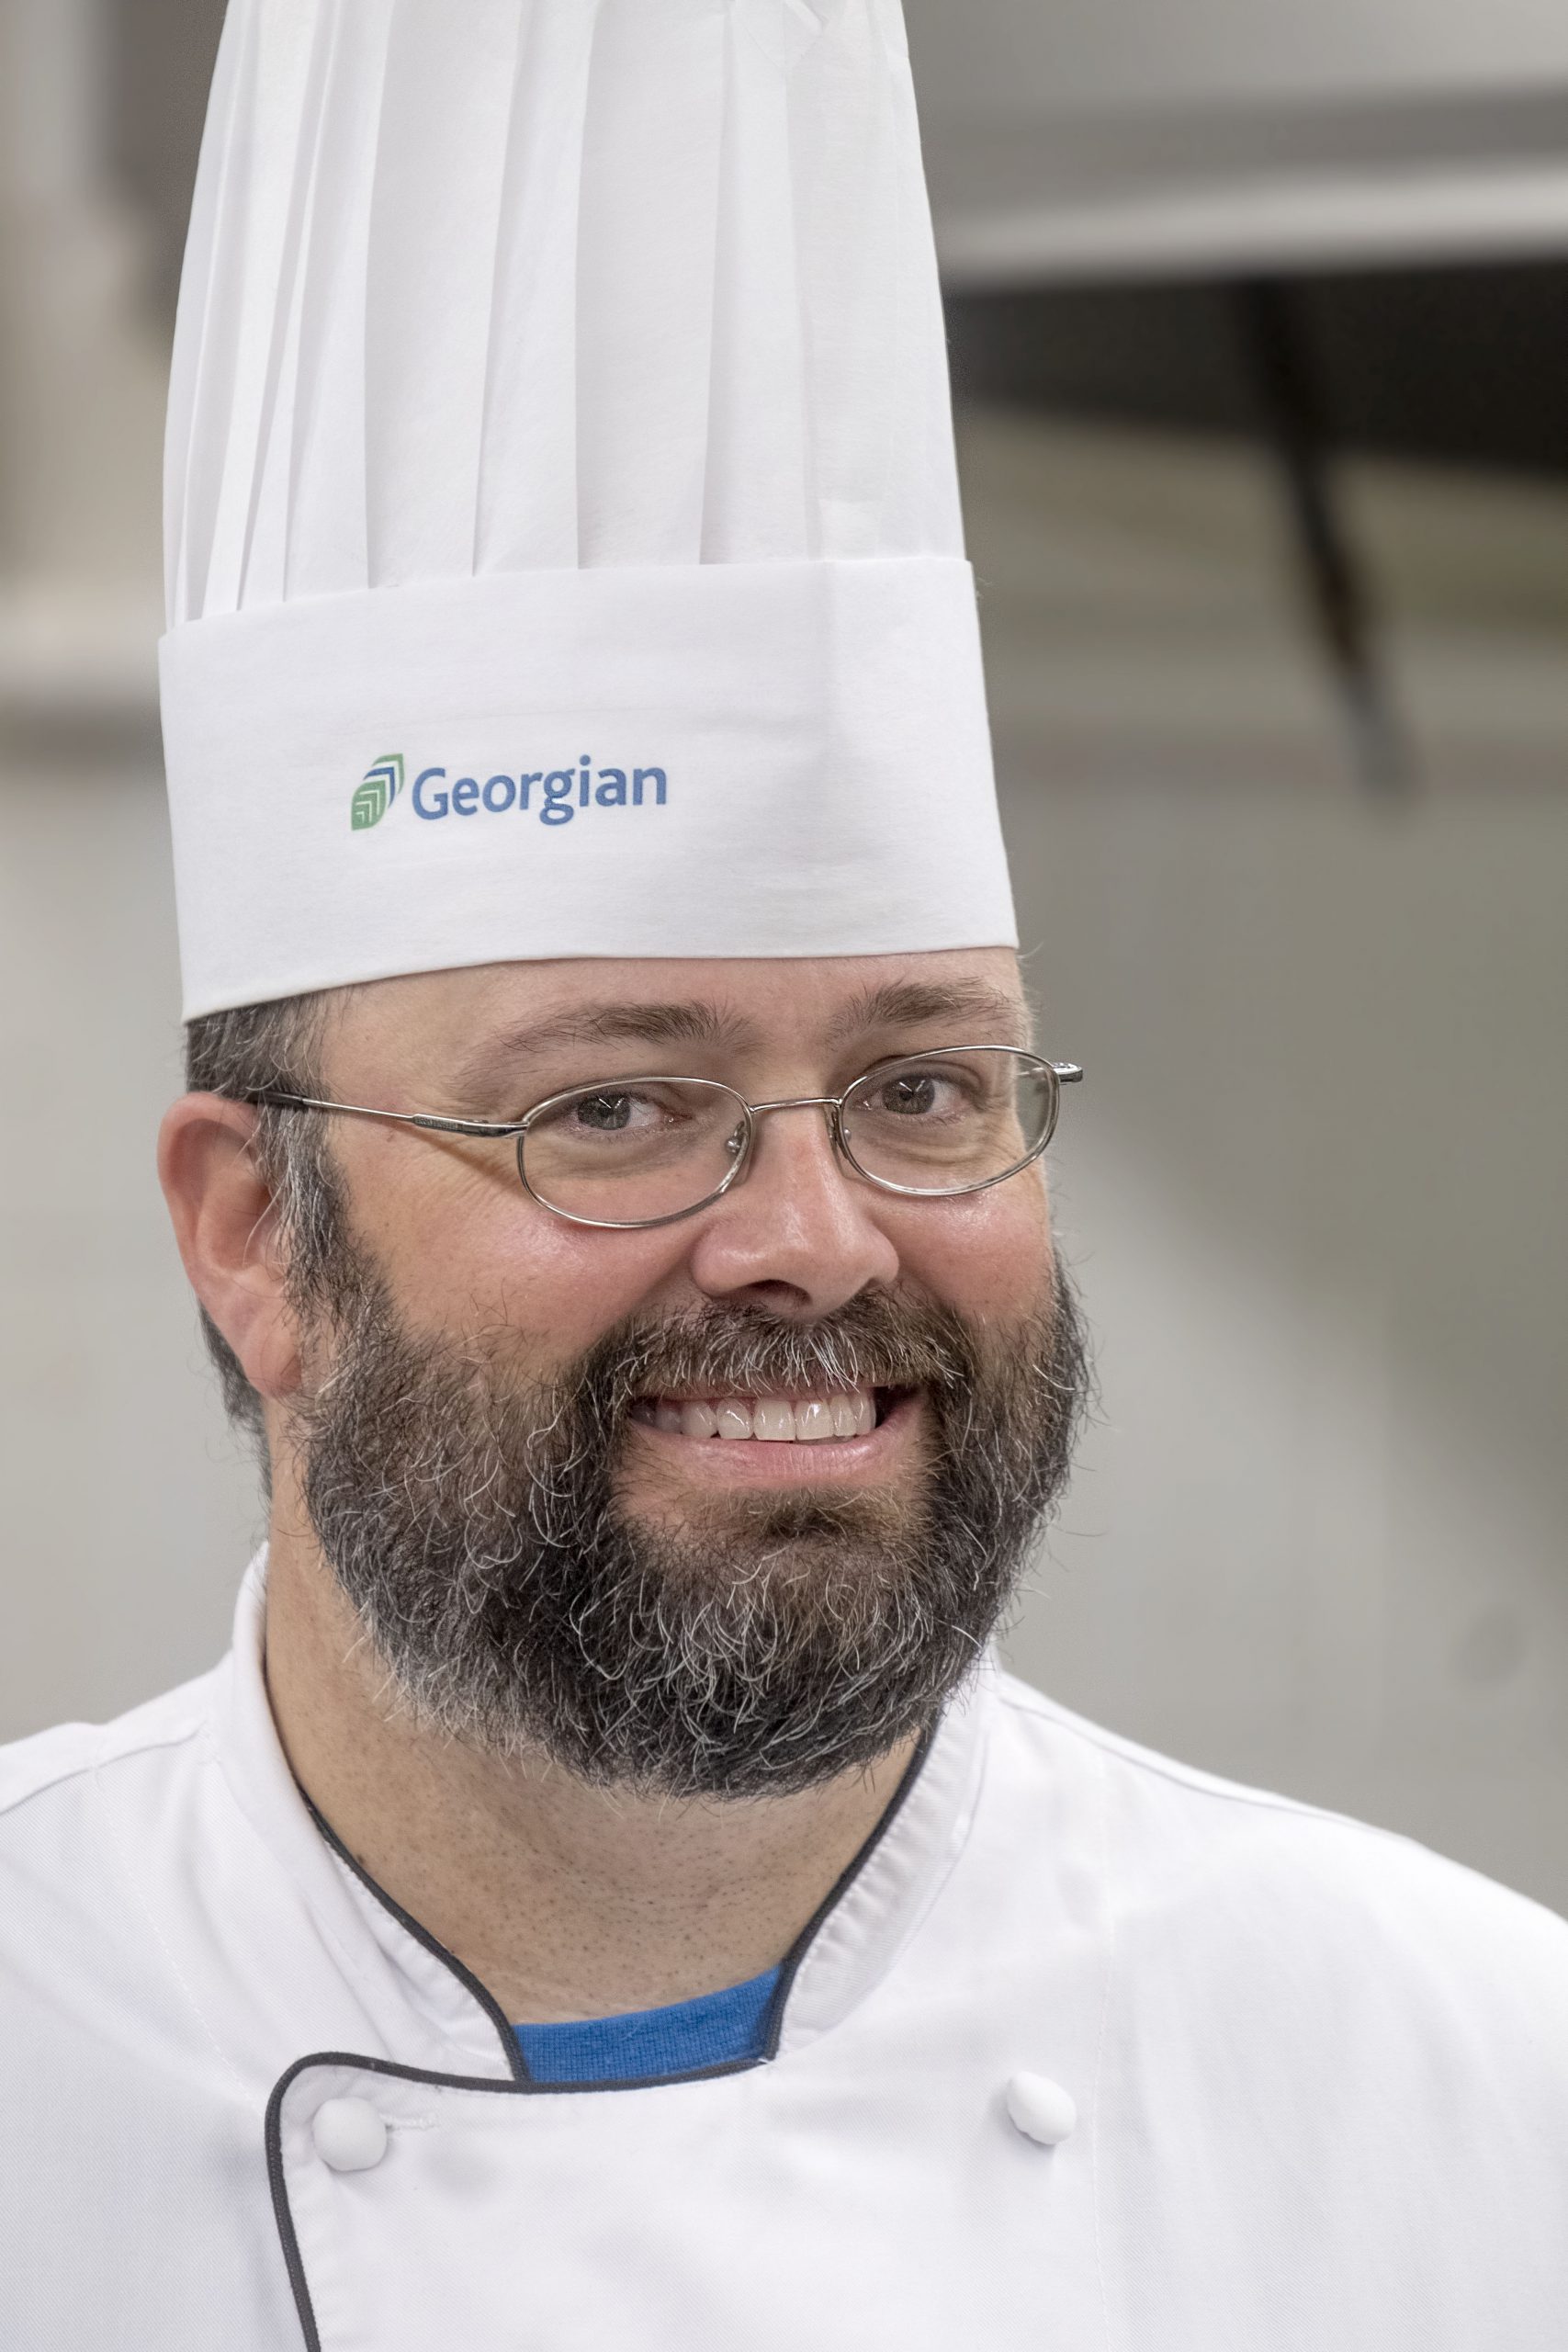 Chef Clements: Bakers always rise to the occasion